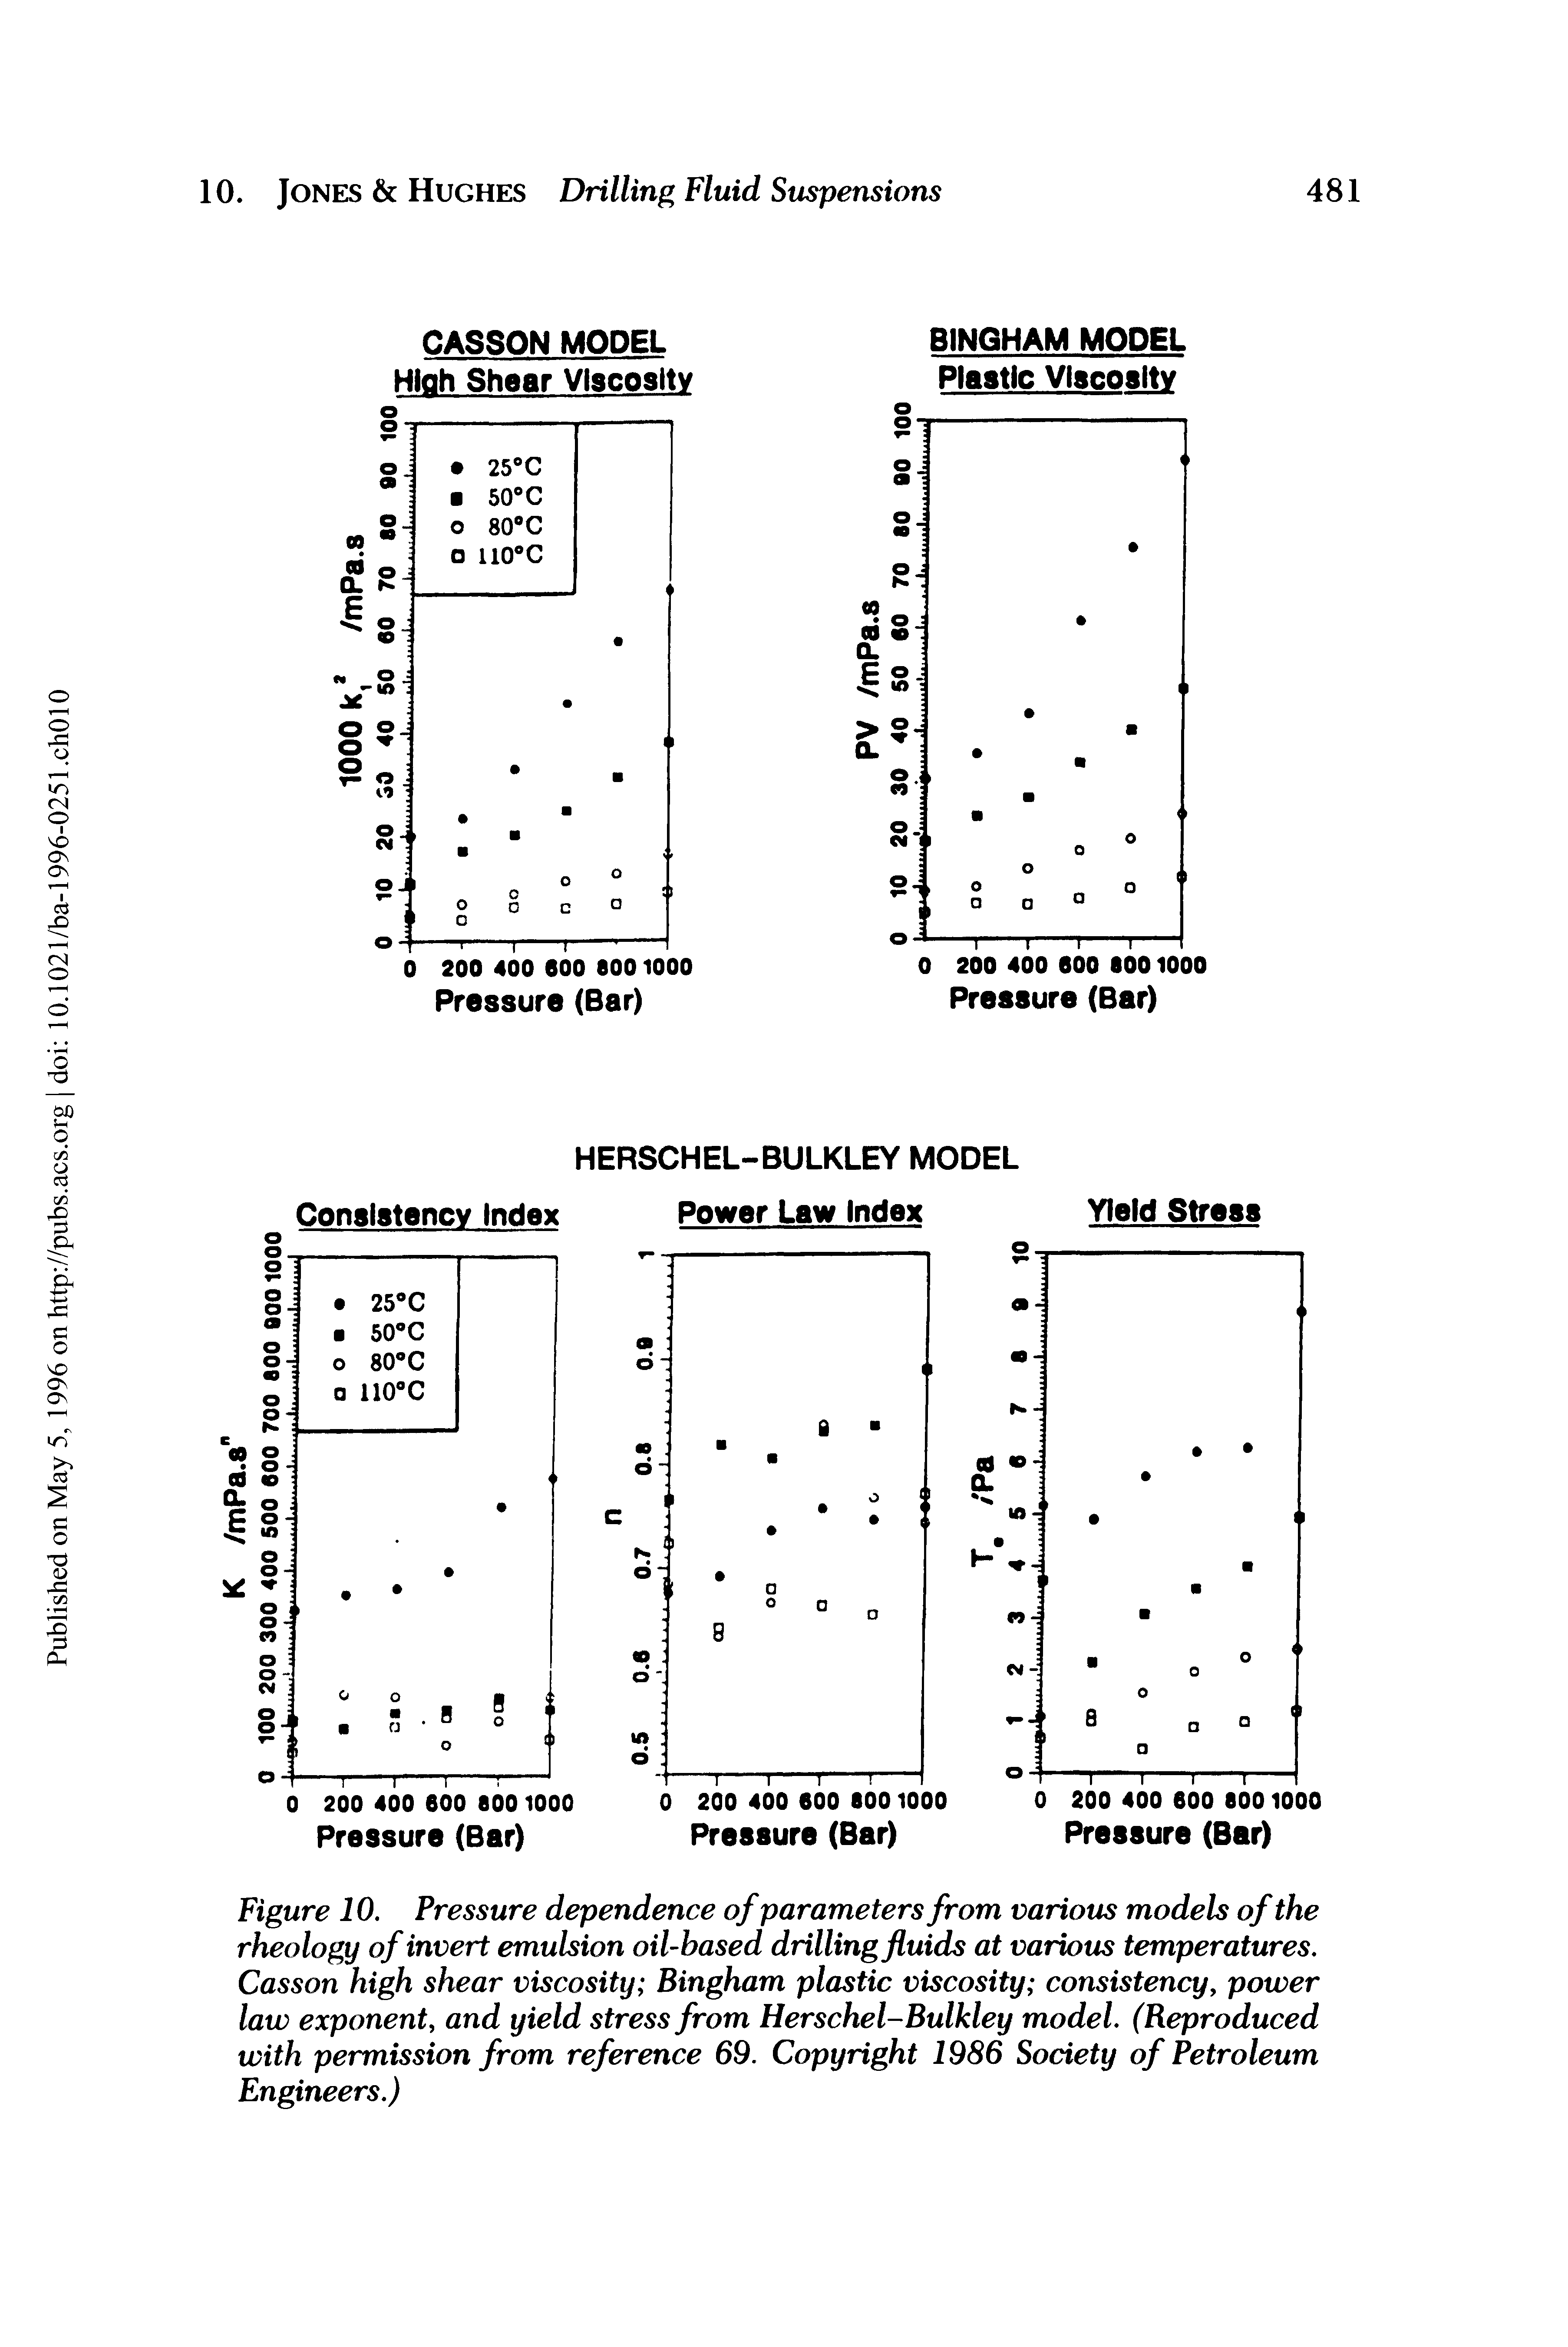 Figure 10. Pressure dependence of parameters from various models of the rheology of invert emulsion oil-based drilling fluids at various temperatures. Casson high shear viscosity Bingham plastic viscosity consistency, power law exponent, and yield stress from Herschel-Bulkley model. (Reproduced with permission from reference 69. Copyright 1986 Society of Petroleum Engineers.)...